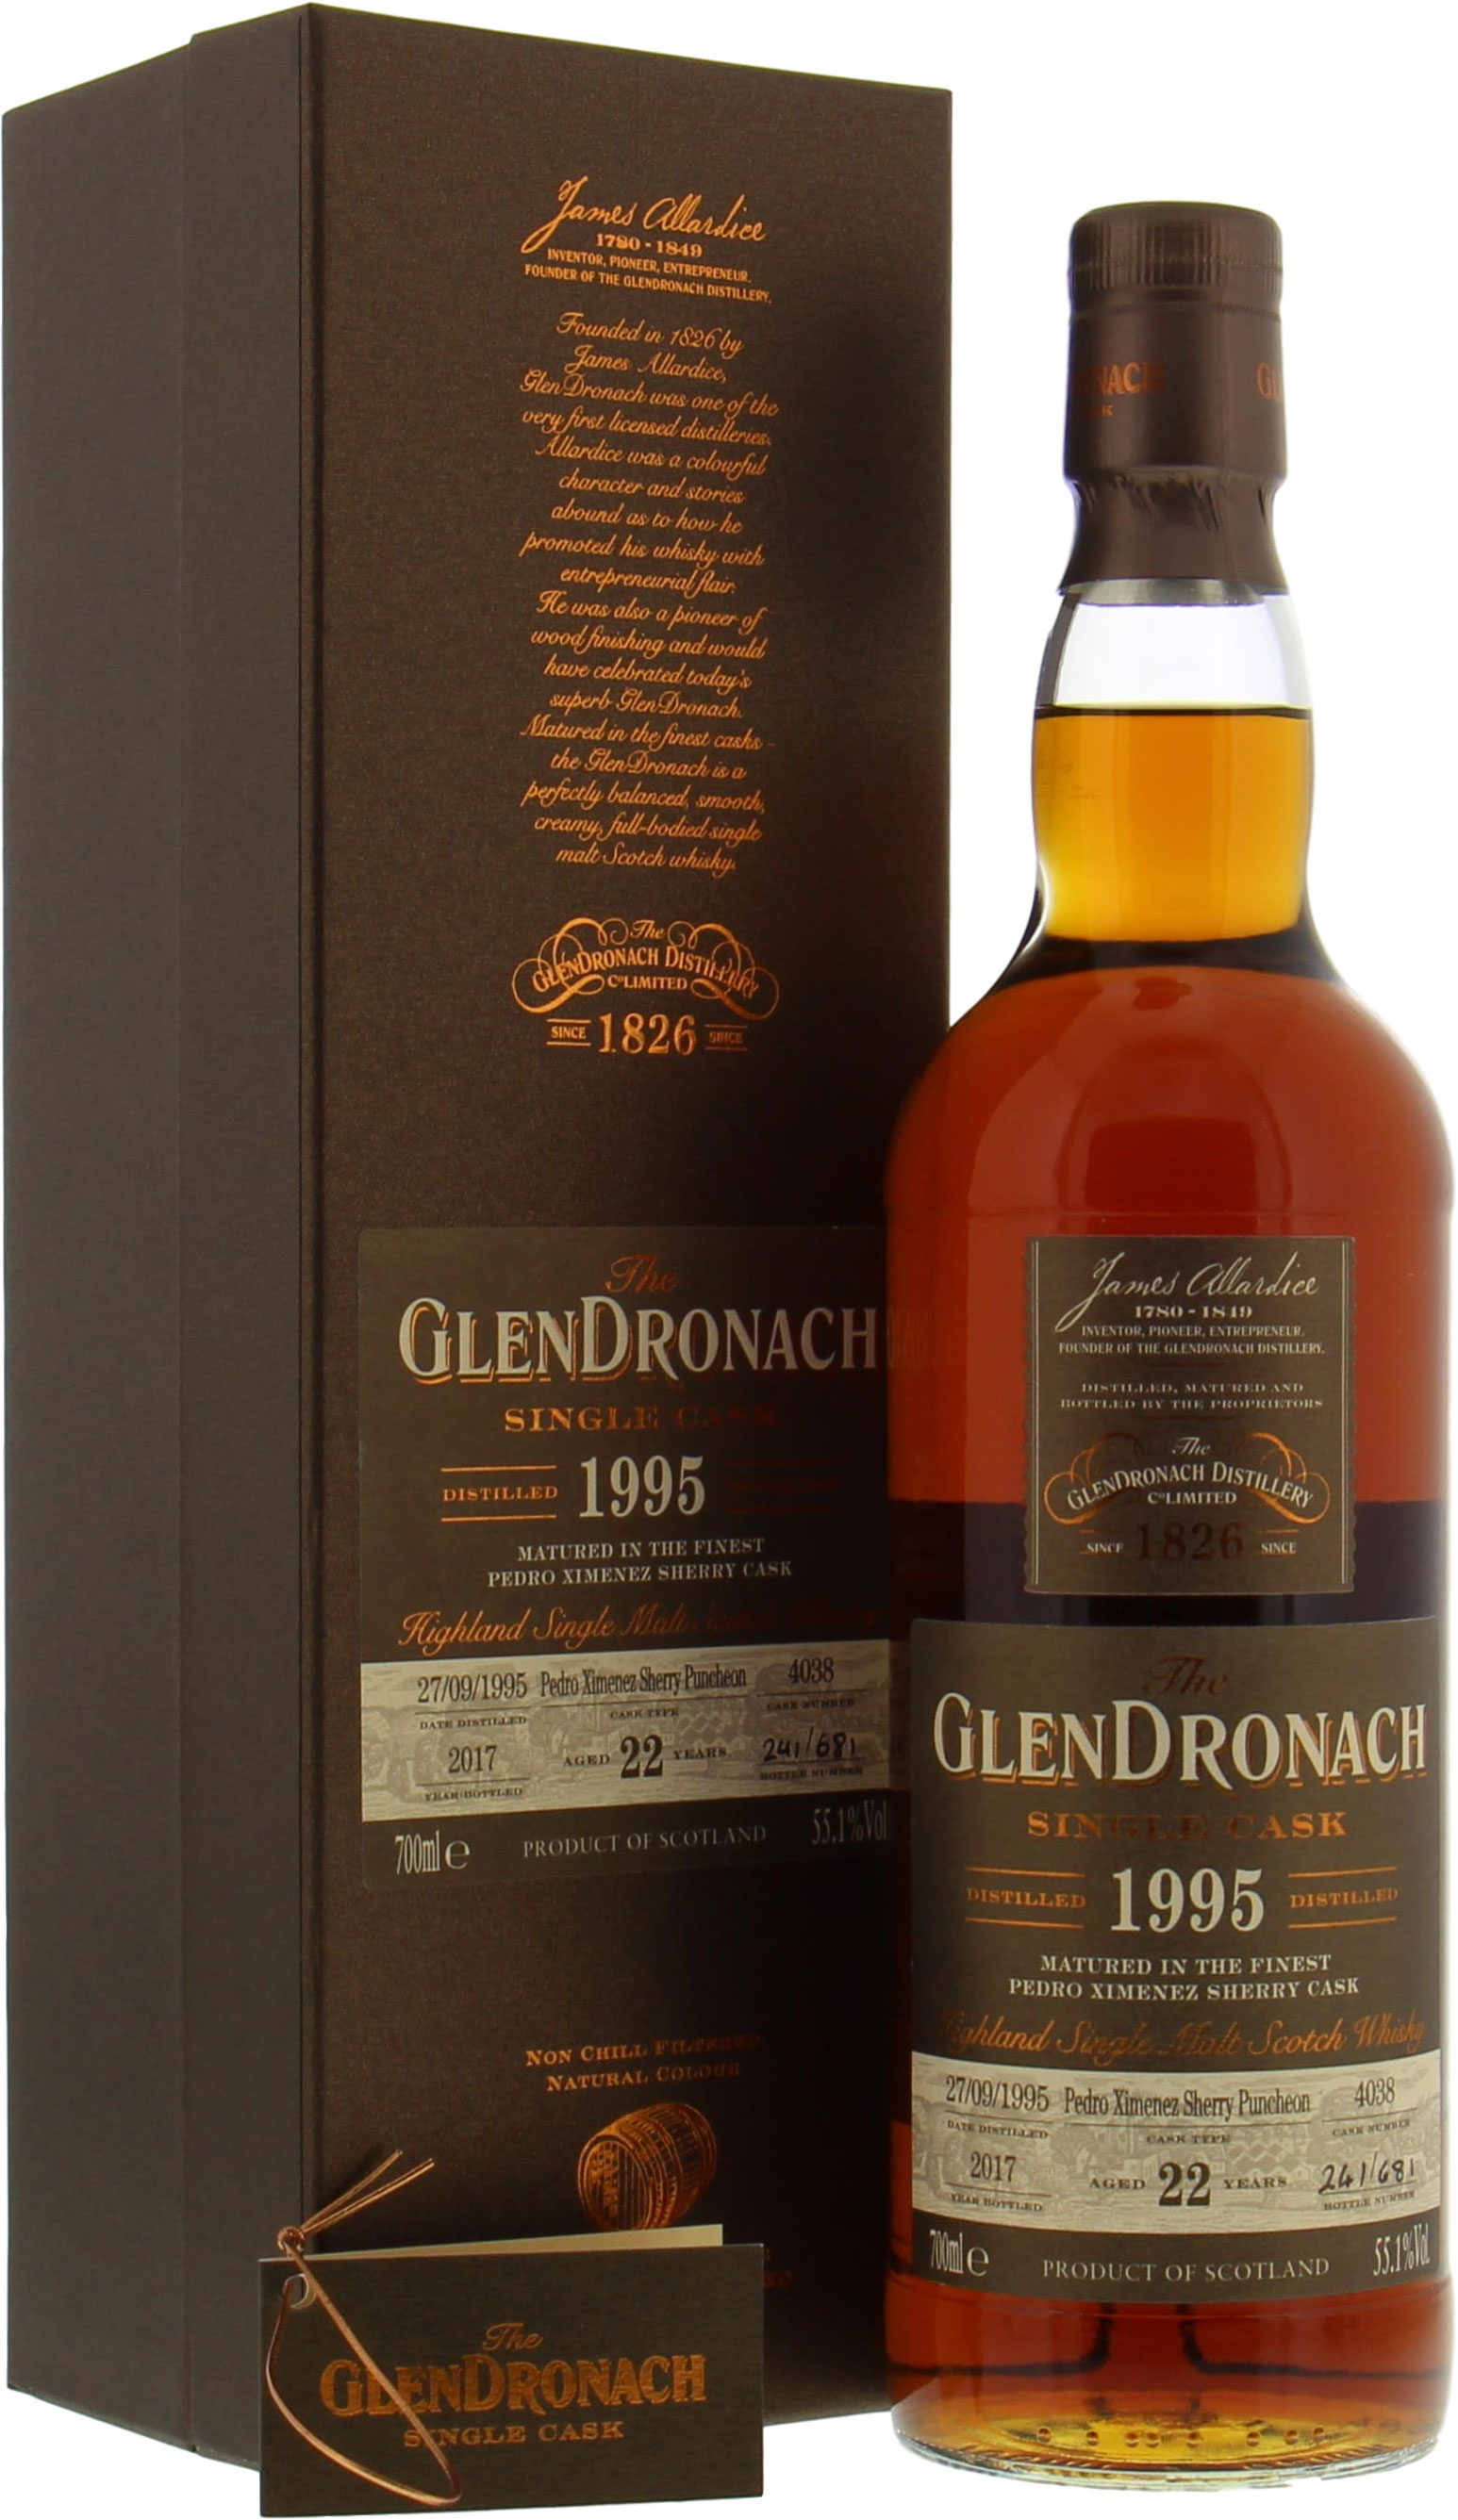 Glendronach - 22 Years Old Batch 16 Single Cask 4038 55.1% 1995 In Original Container